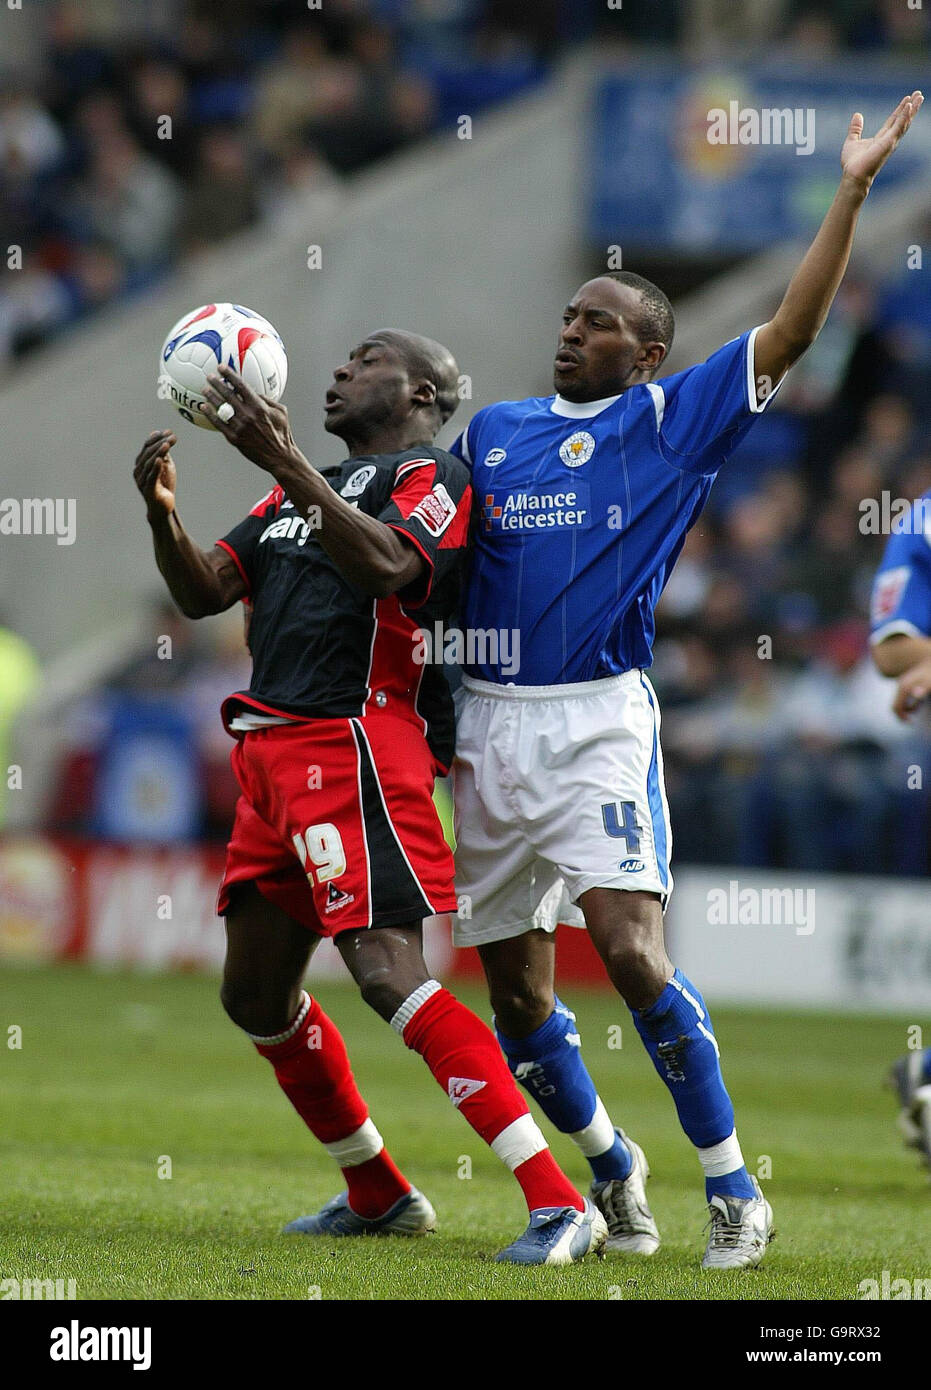 Leicester City's Darren Kenton (right) tussles with QPR's Paul Furlong during the Coca-Cola Football League Championship match at the Walkers Stadium, Leicester. Stock Photo